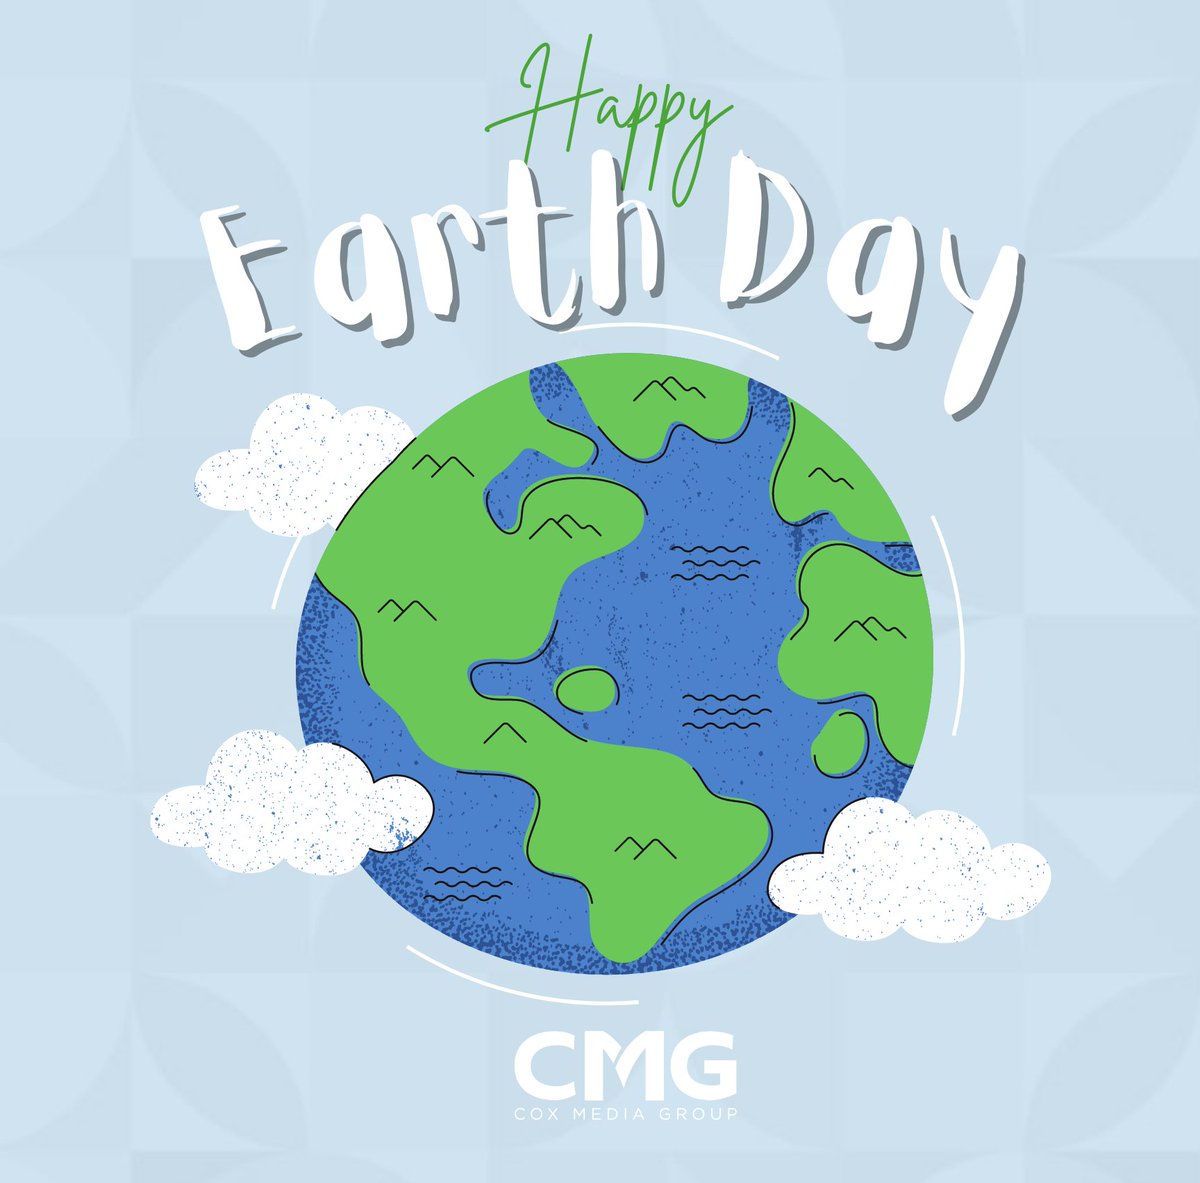 Happy #EarthDay! 🌎 Across our markets, our commitment to #sustainability has led to over $1 million in economic impact for the communities we serve. Together, we're making a difference for a cleaner, greener future. Read more about our impact on cmg.com/news #WeAreCMG